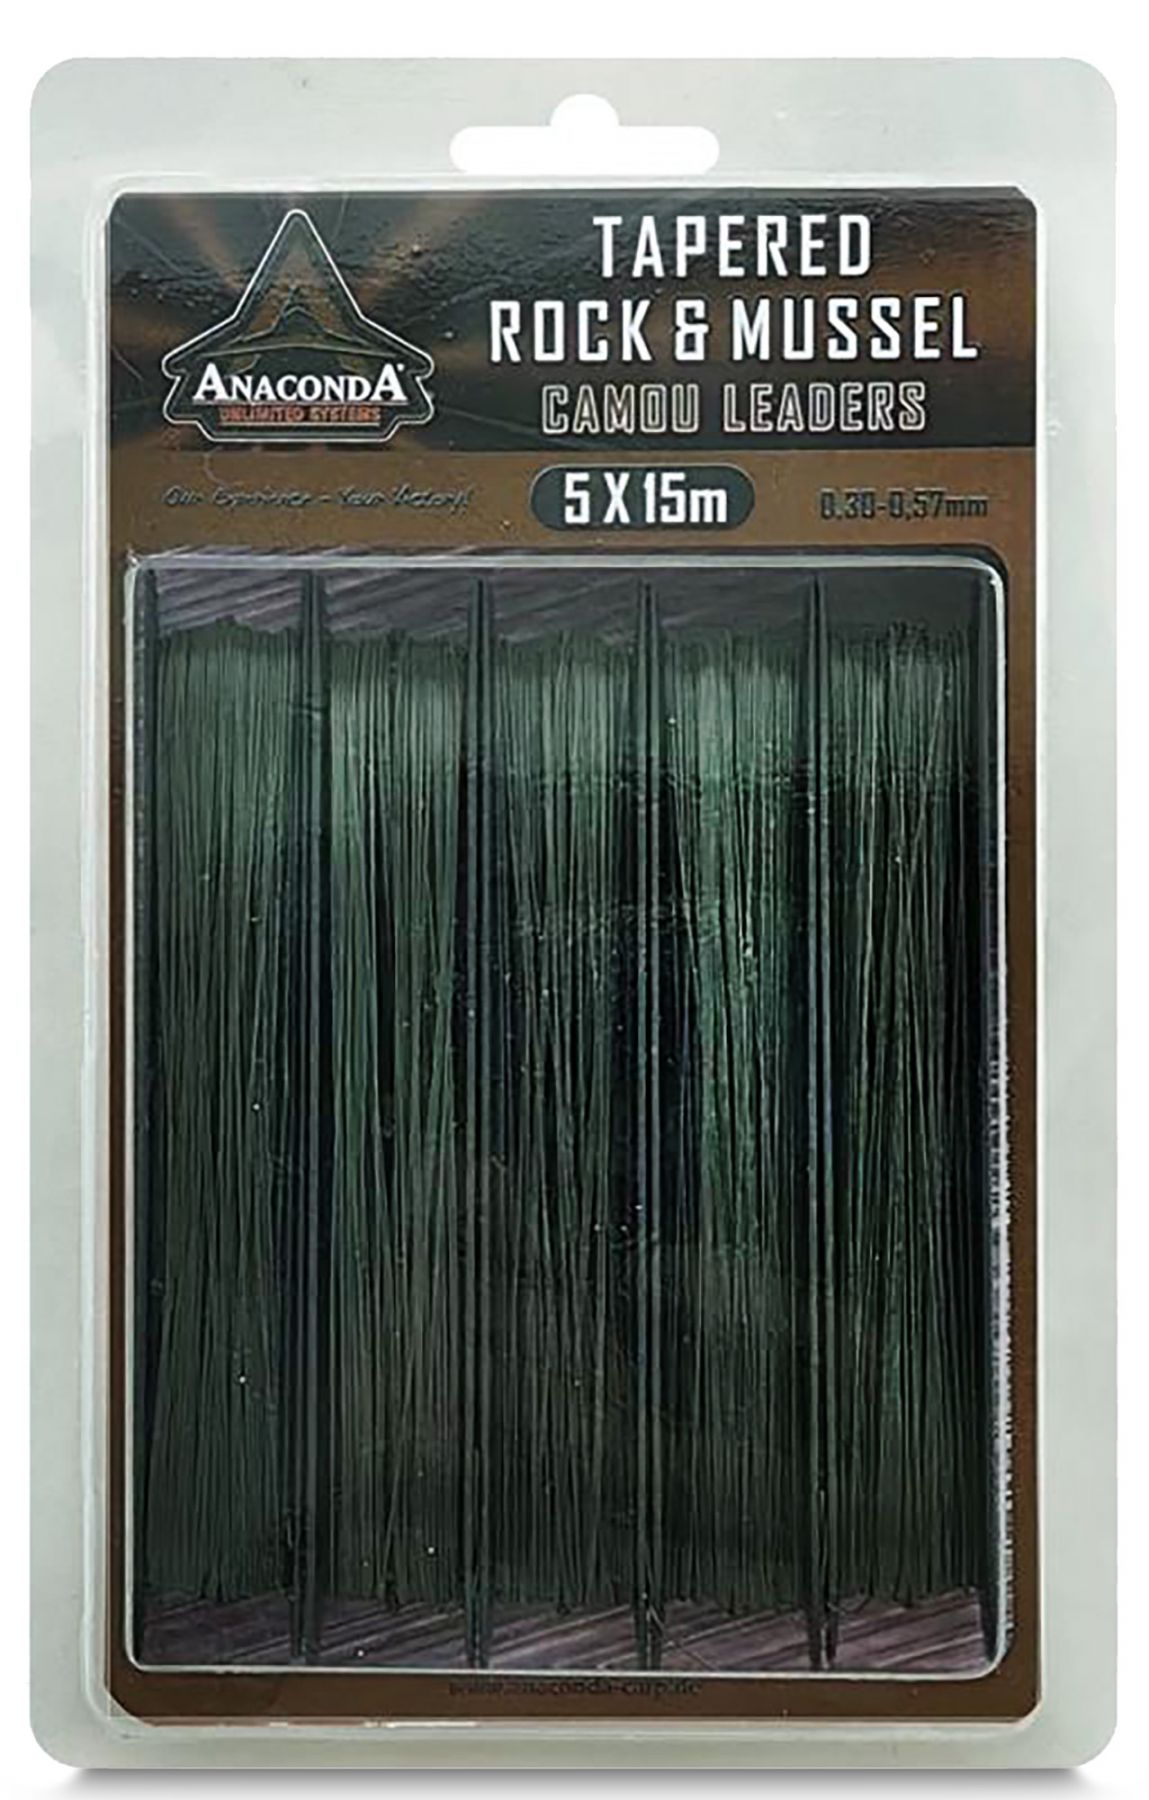 Anaconda Tapered Rock & Mussel Camou Leaders 15m (5 Stück)